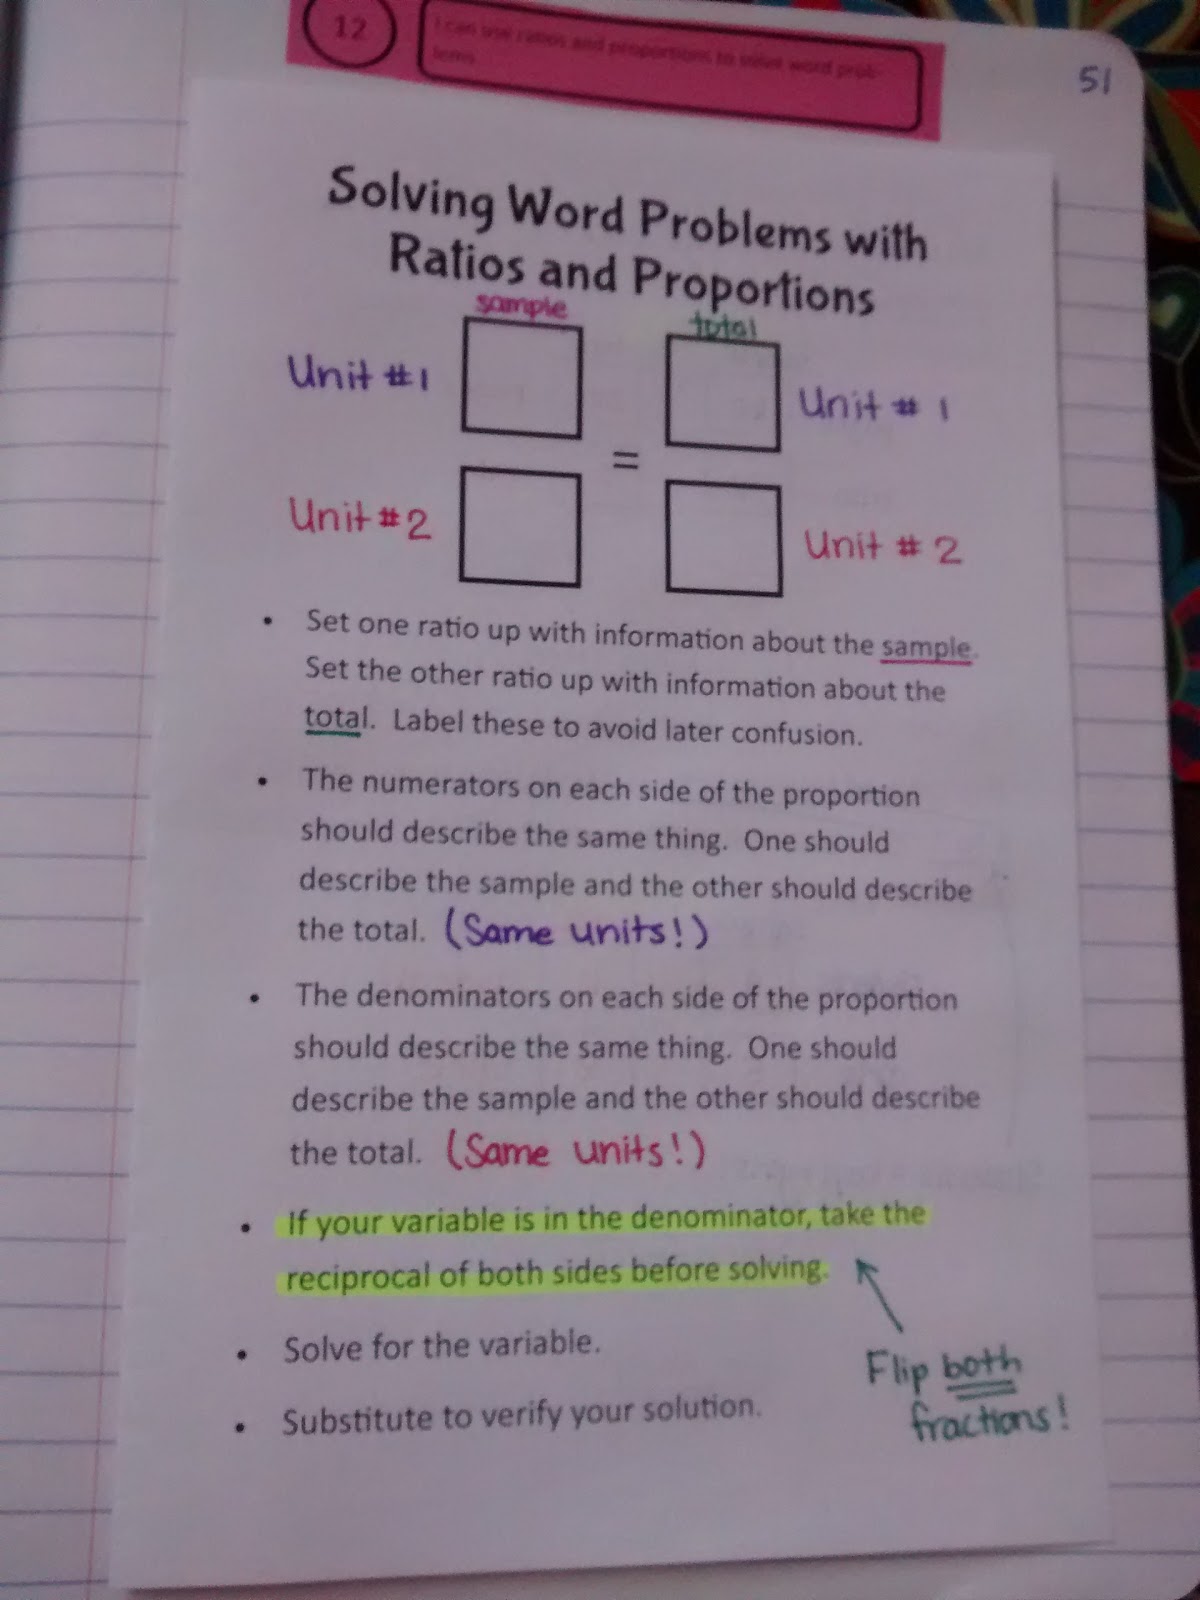 https://mathequalslove.net/wp-content/uploads/2015/10/solving-word-problems-ratios-proportions-foldable-6.jpg